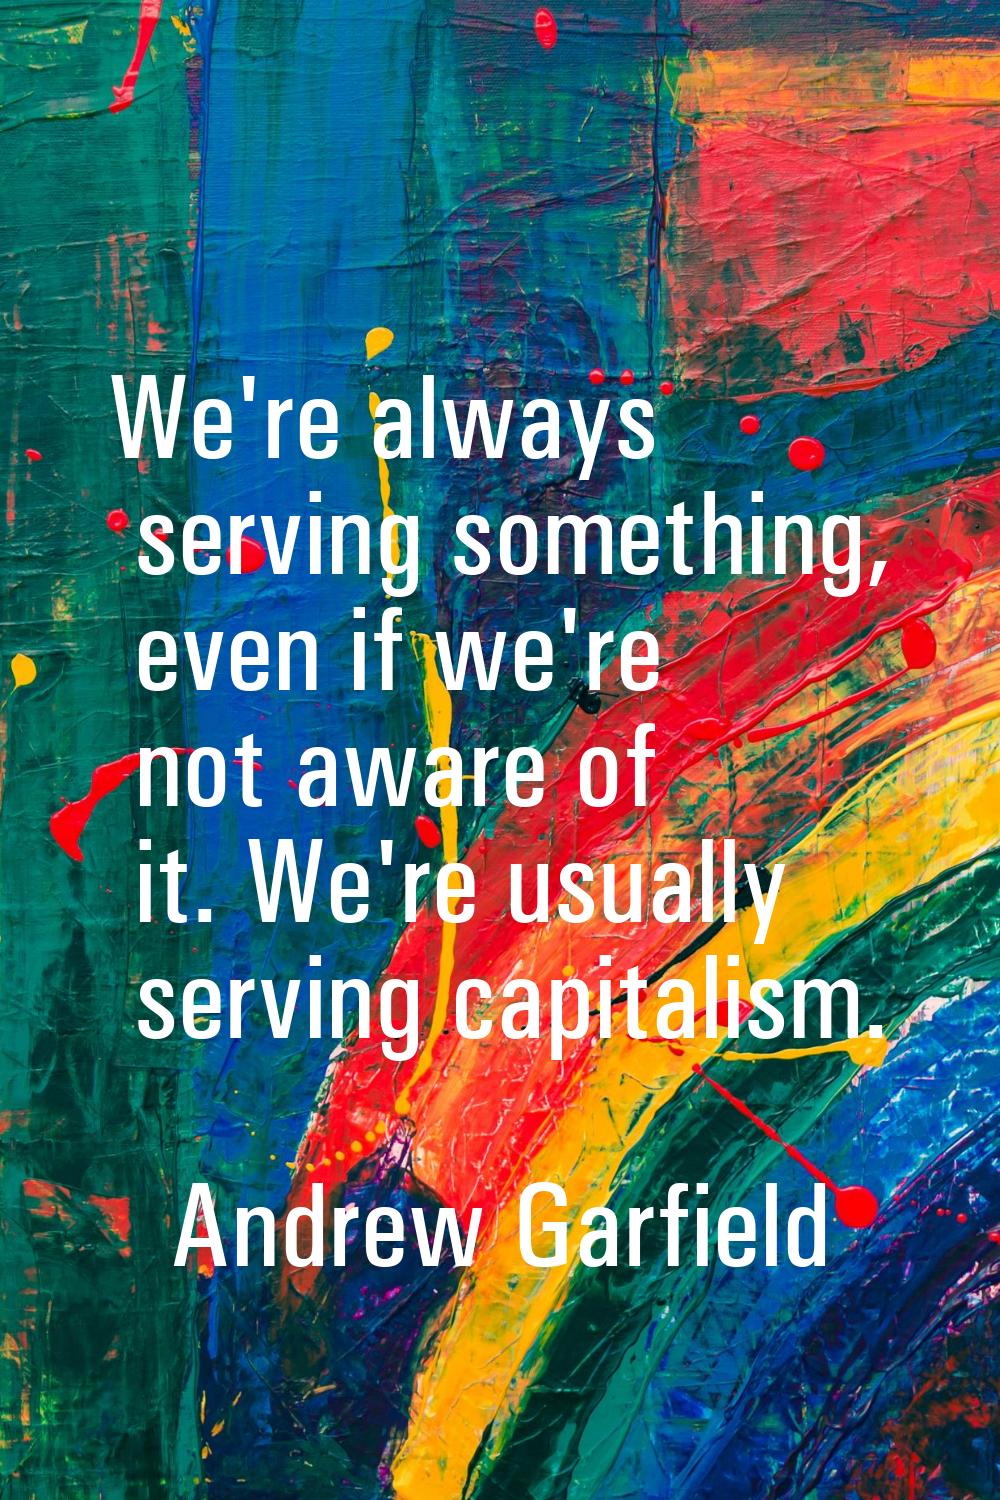 We're always serving something, even if we're not aware of it. We're usually serving capitalism.